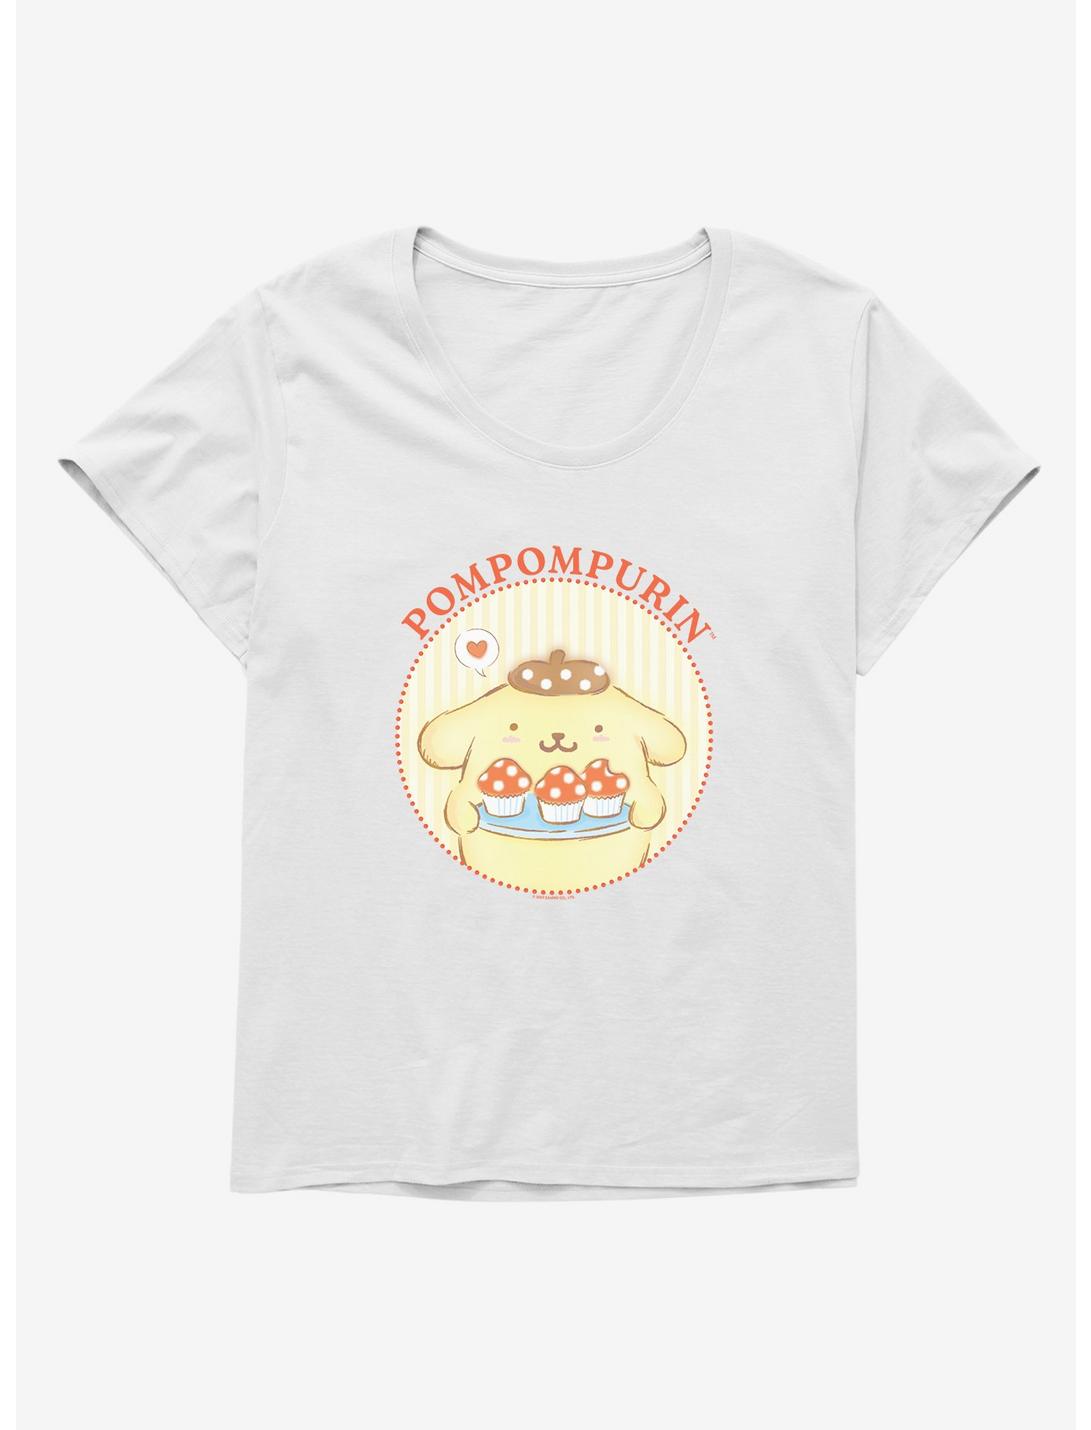 Hello Kitty And Friends Pompompurin Mushroom Cupcakes Womens T-Shirt Plus Size, WHITE, hi-res